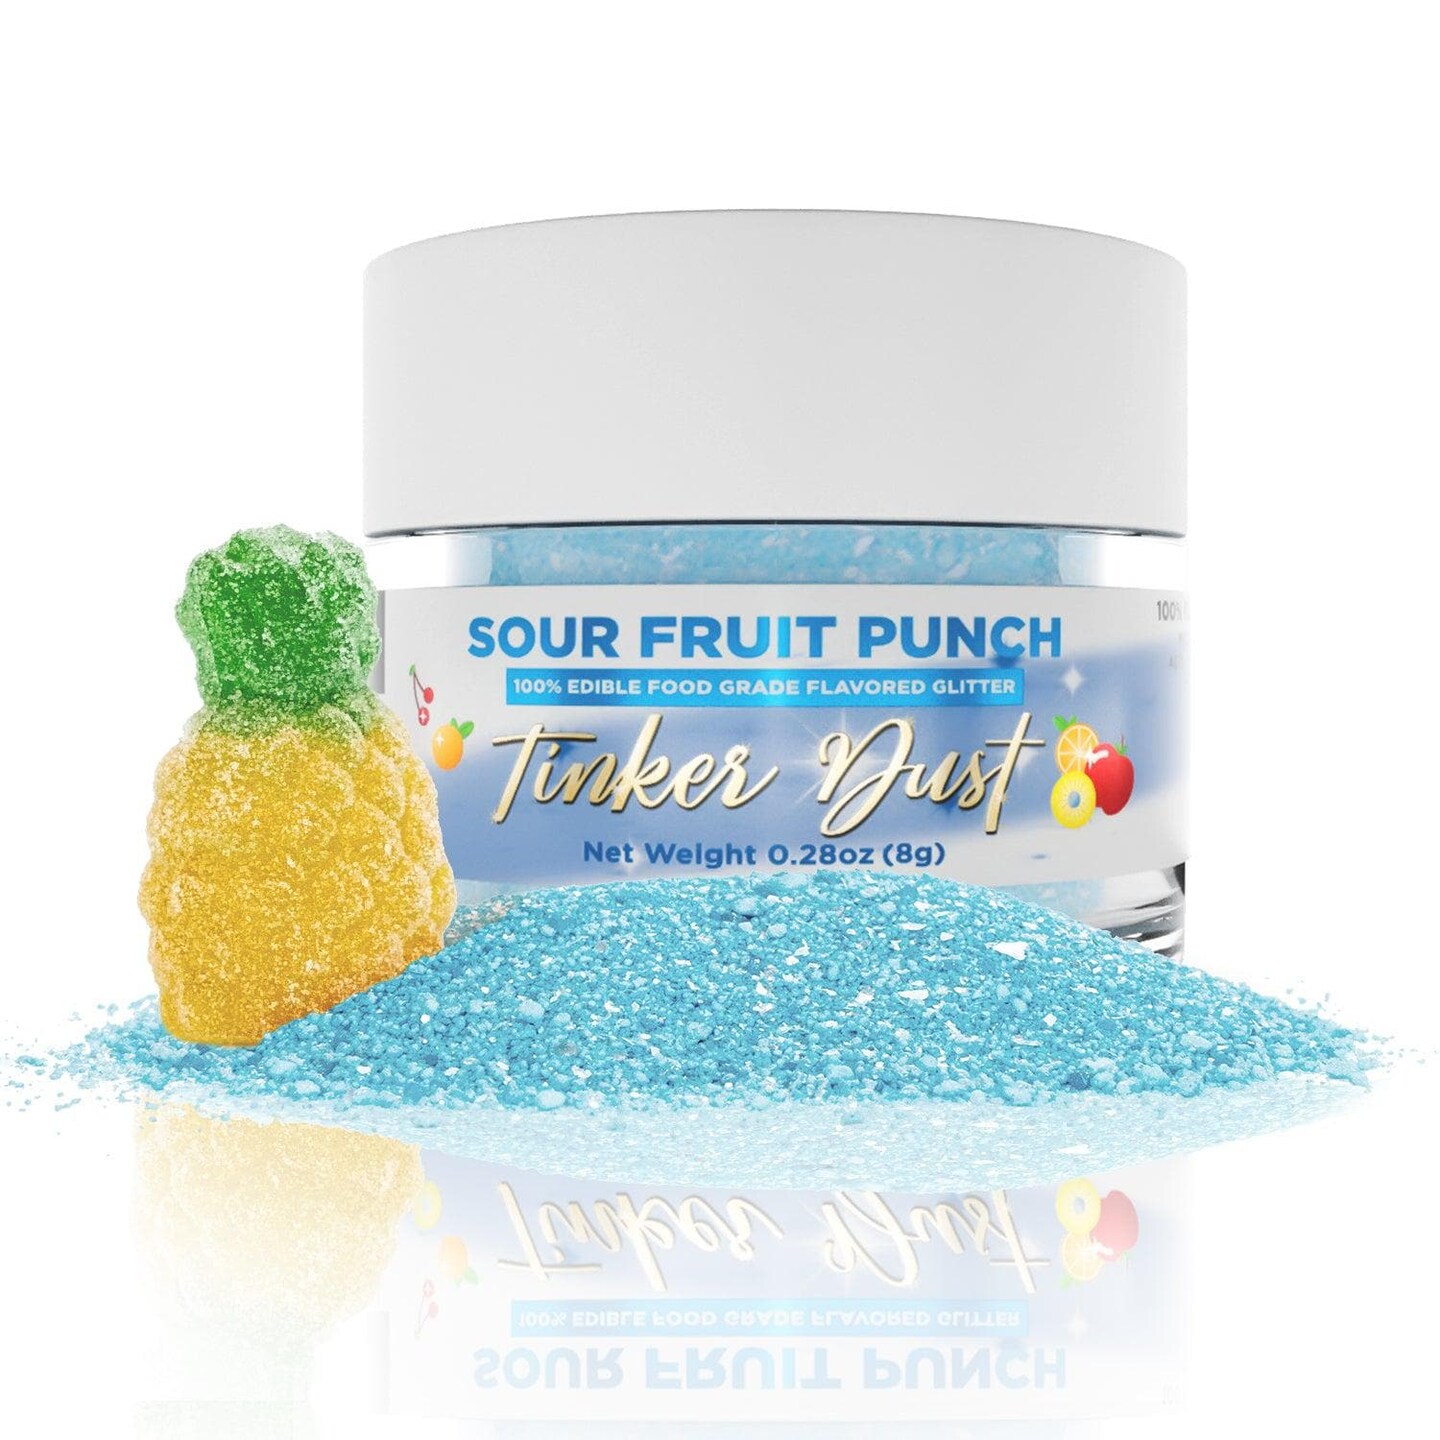 Sour Fruit Punch Edible Glitter Sugar - Decorative Sugar for Foods, Fruits,  Muffins, Cake Decorating. FDA Compliant (8 Grams)